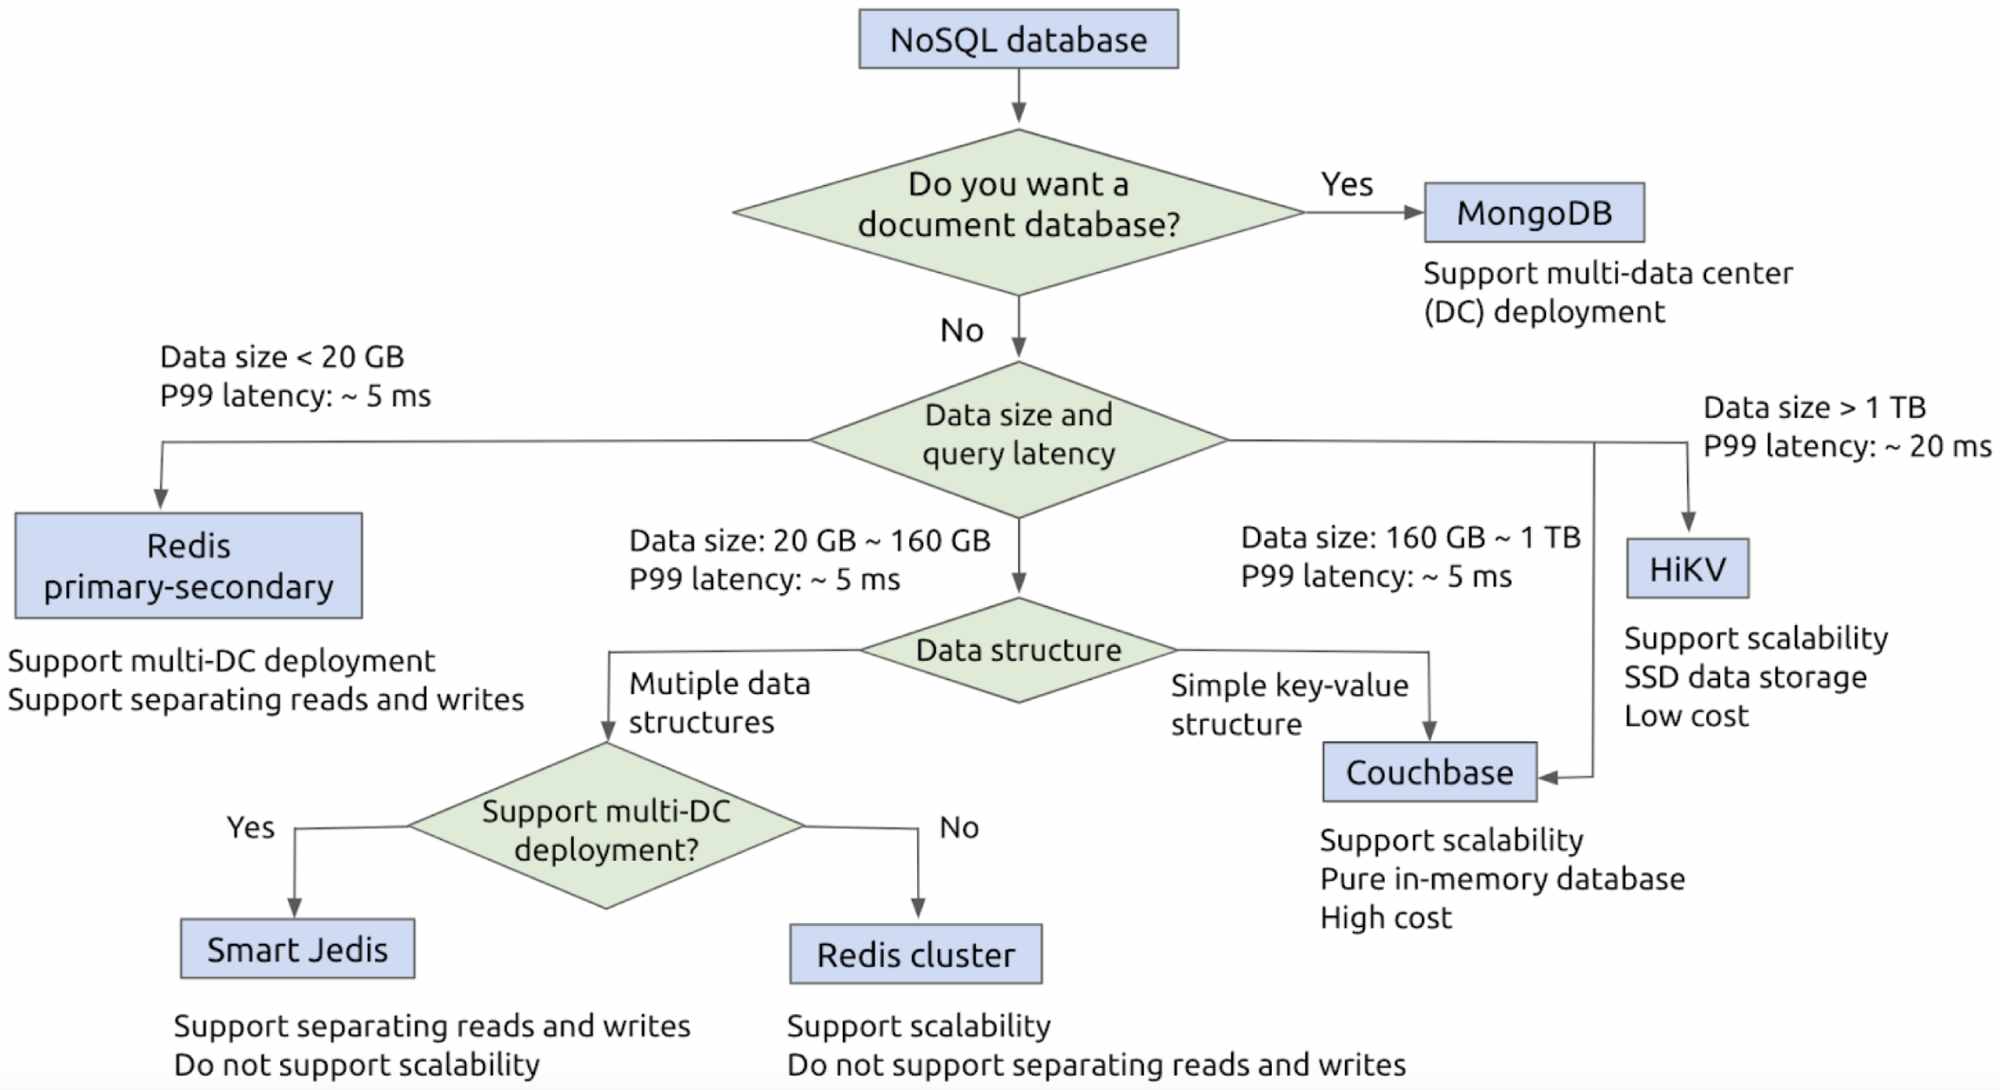 Efficiently choosing a NoSQL database